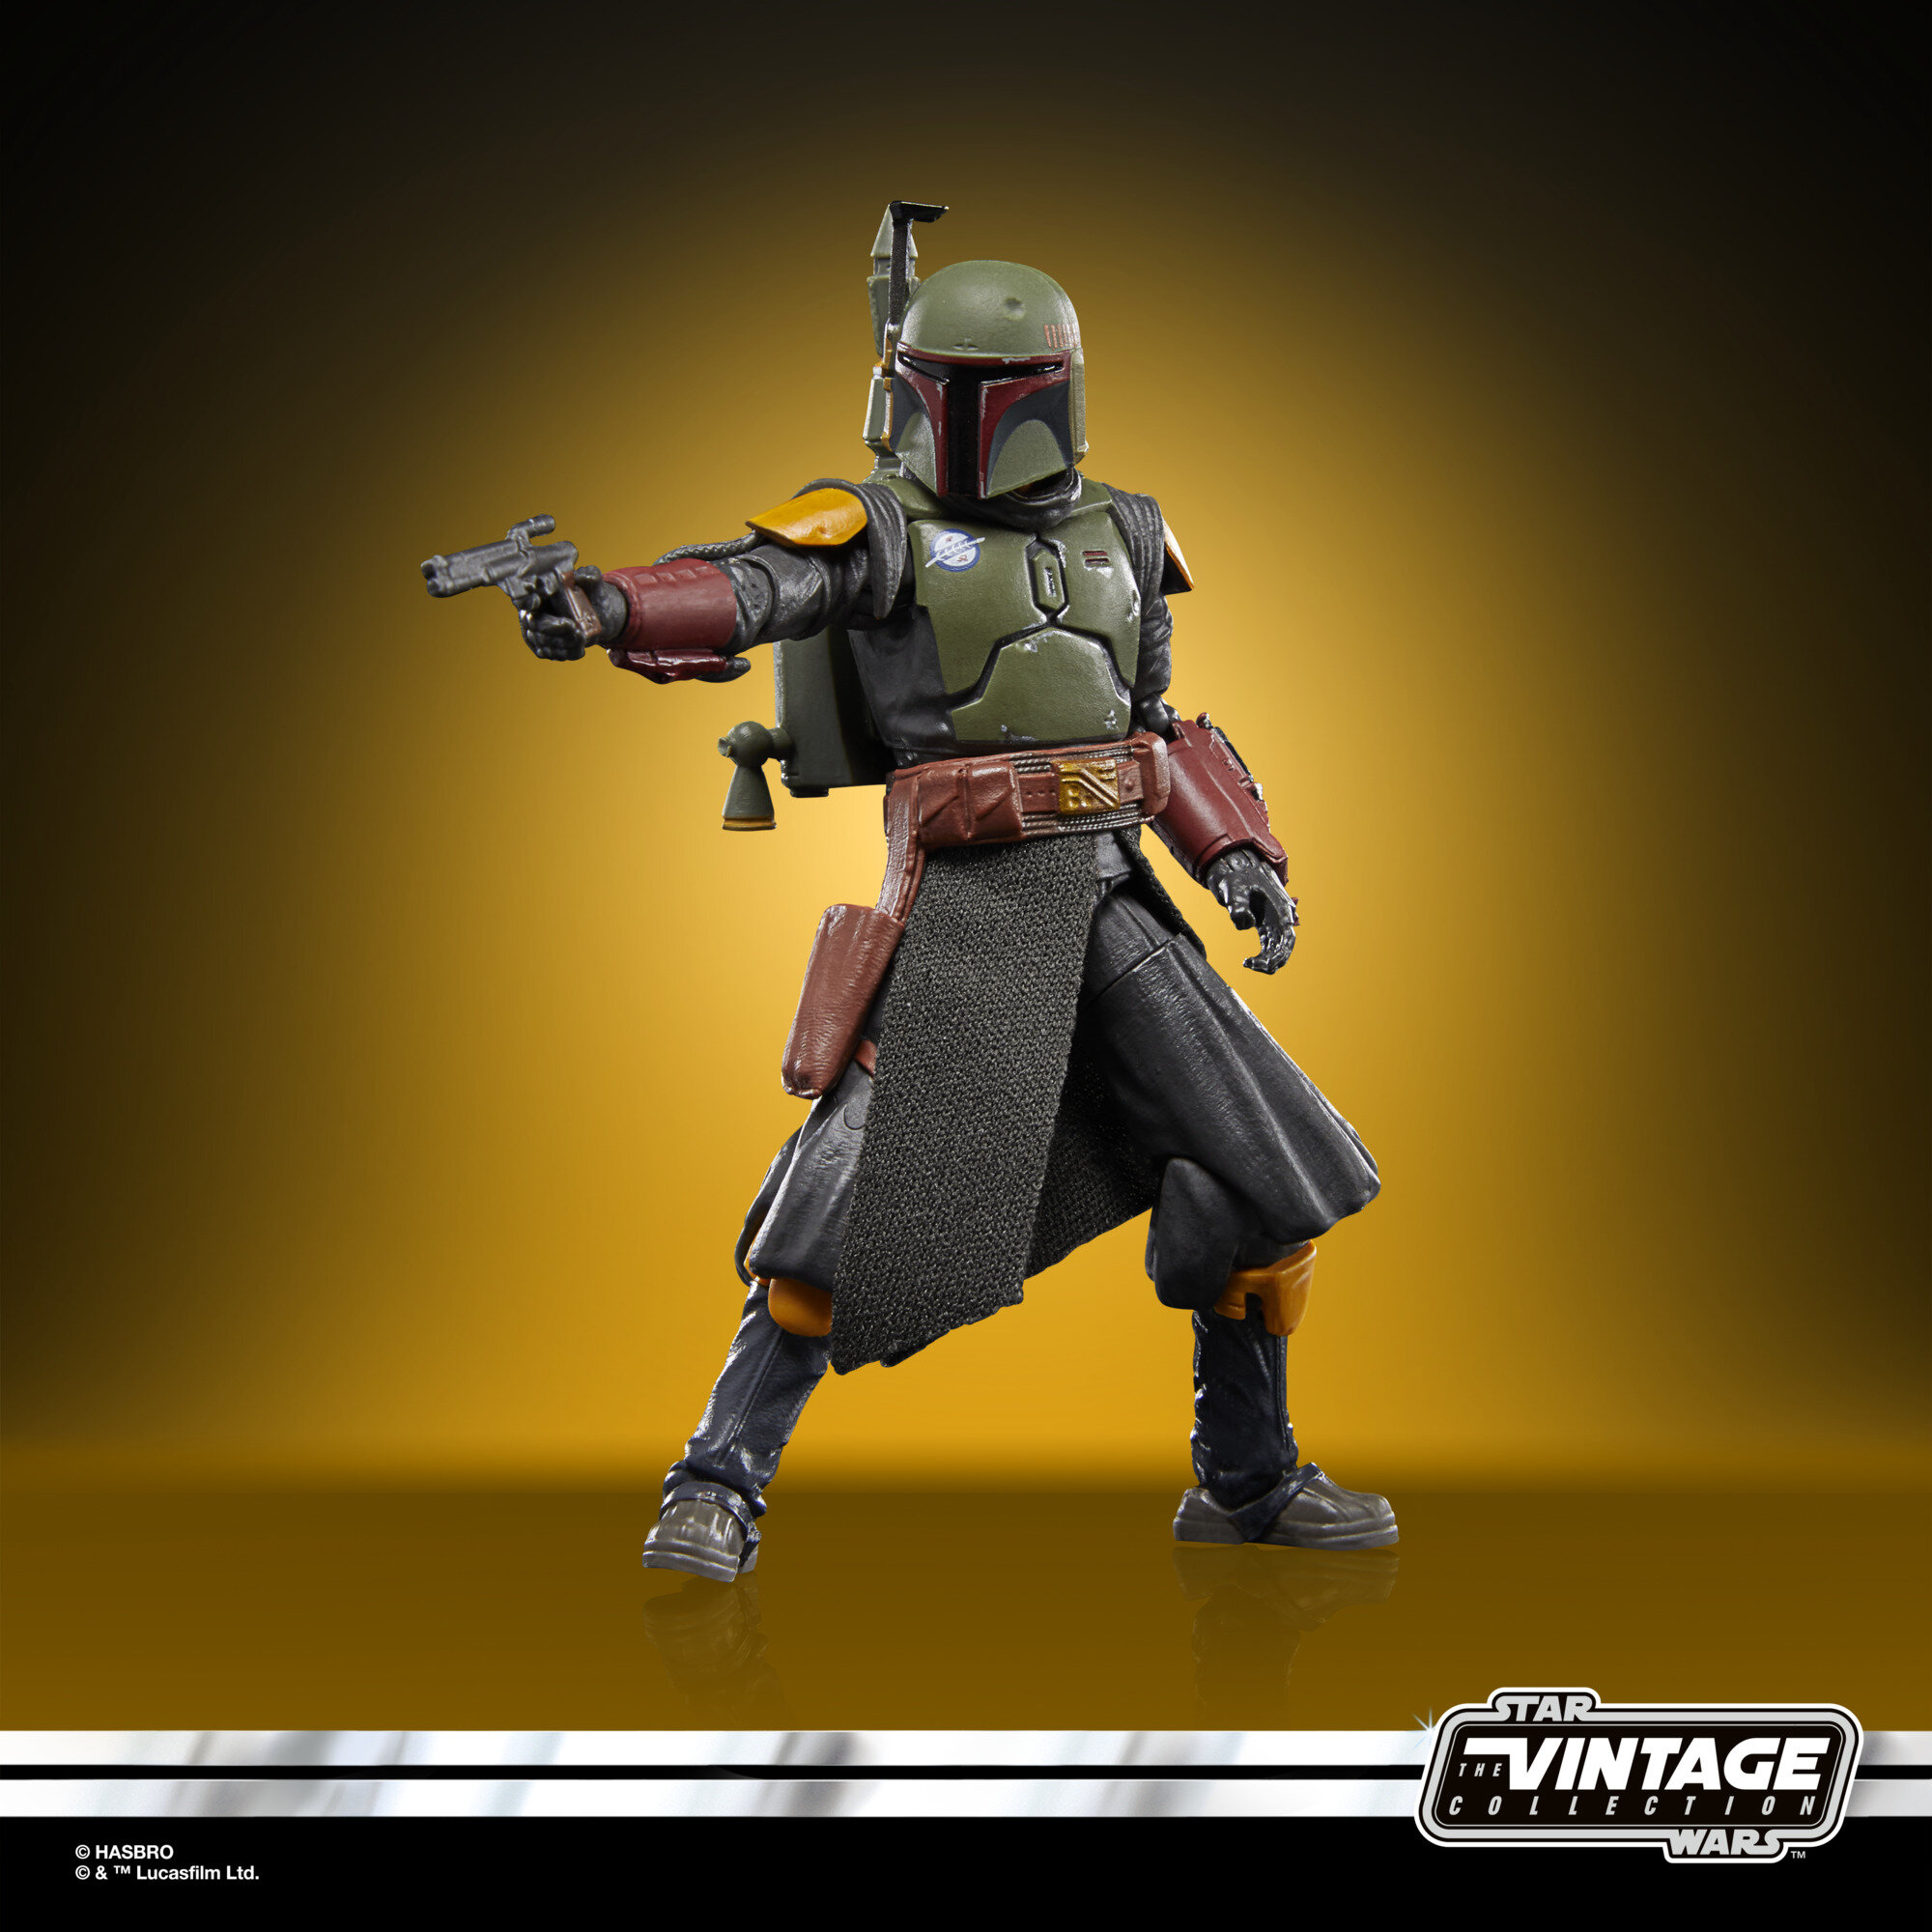 STAR-WARS-THE-VINTAGE-COLLECTION-BOBA-FETT-MORAK-Figure-10.jpg.f4a3b482fcc54d2b33f098c7e1f8b00a.jpg